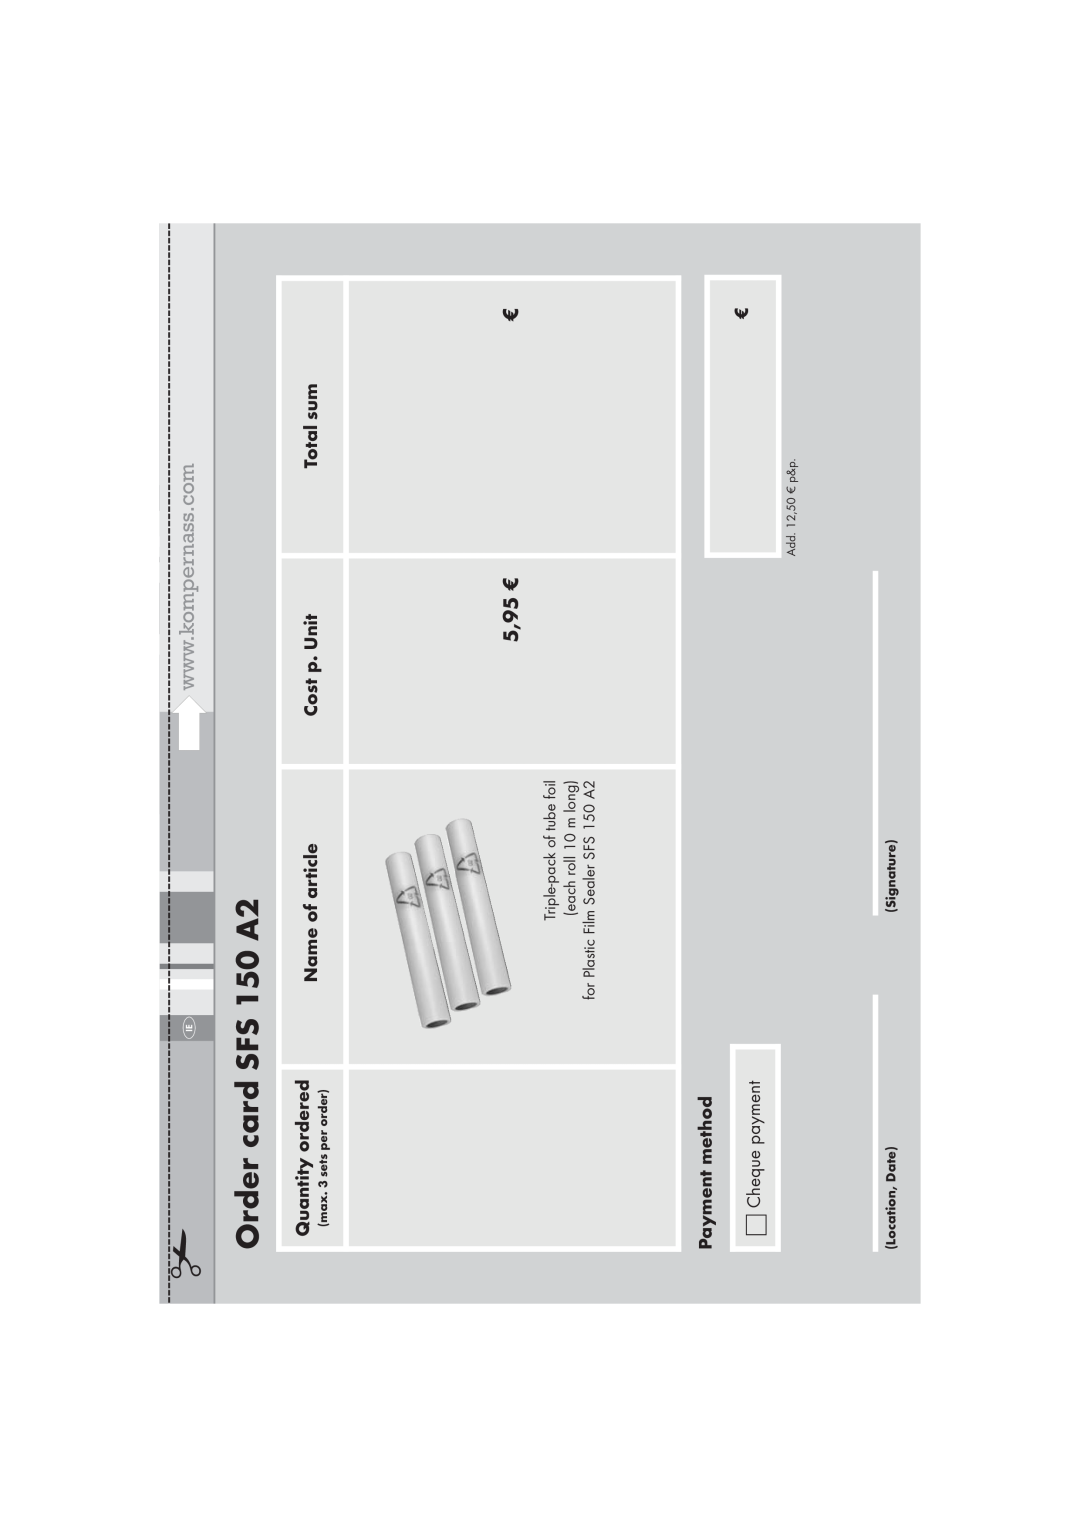 Silvercrest Order card SFS 150 A2, Quantity ordered, Name of article, Cost p. Unit, Total sum, max. 3 sets per order 